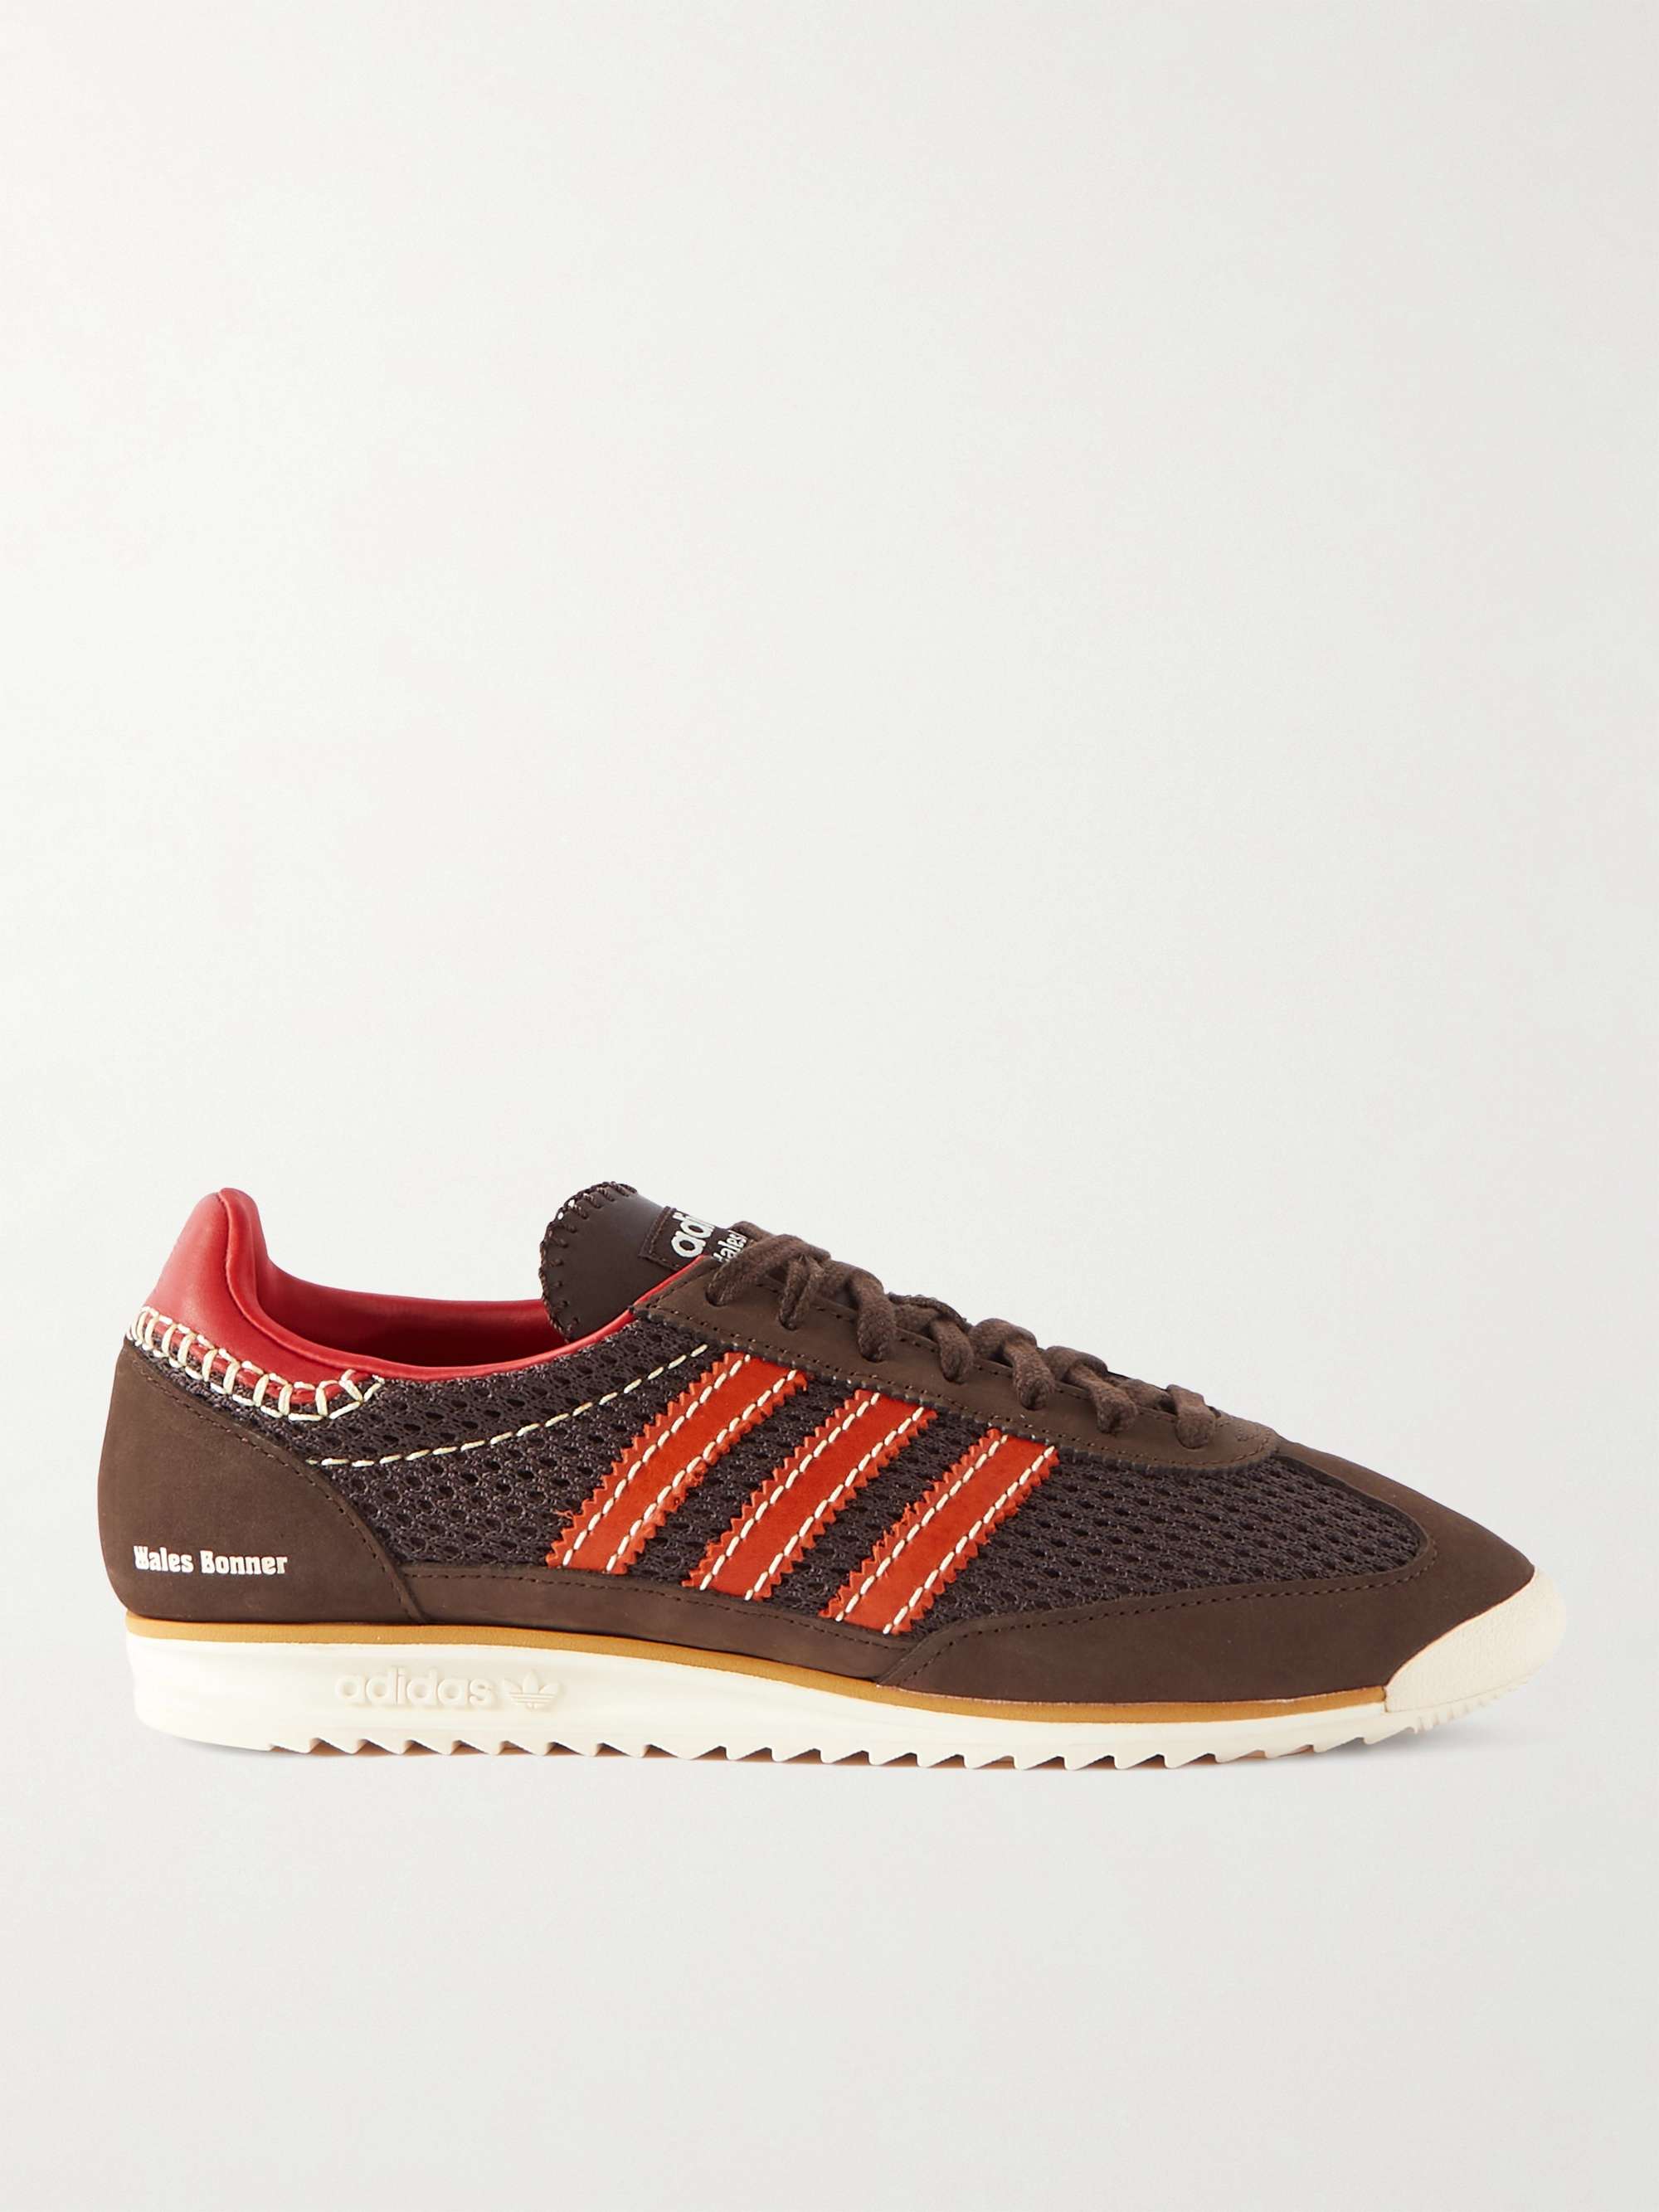 Adidas Consortium + Wales Bonner Sl72 Suede And Mesh Sneakers For Men | Mr  Porter